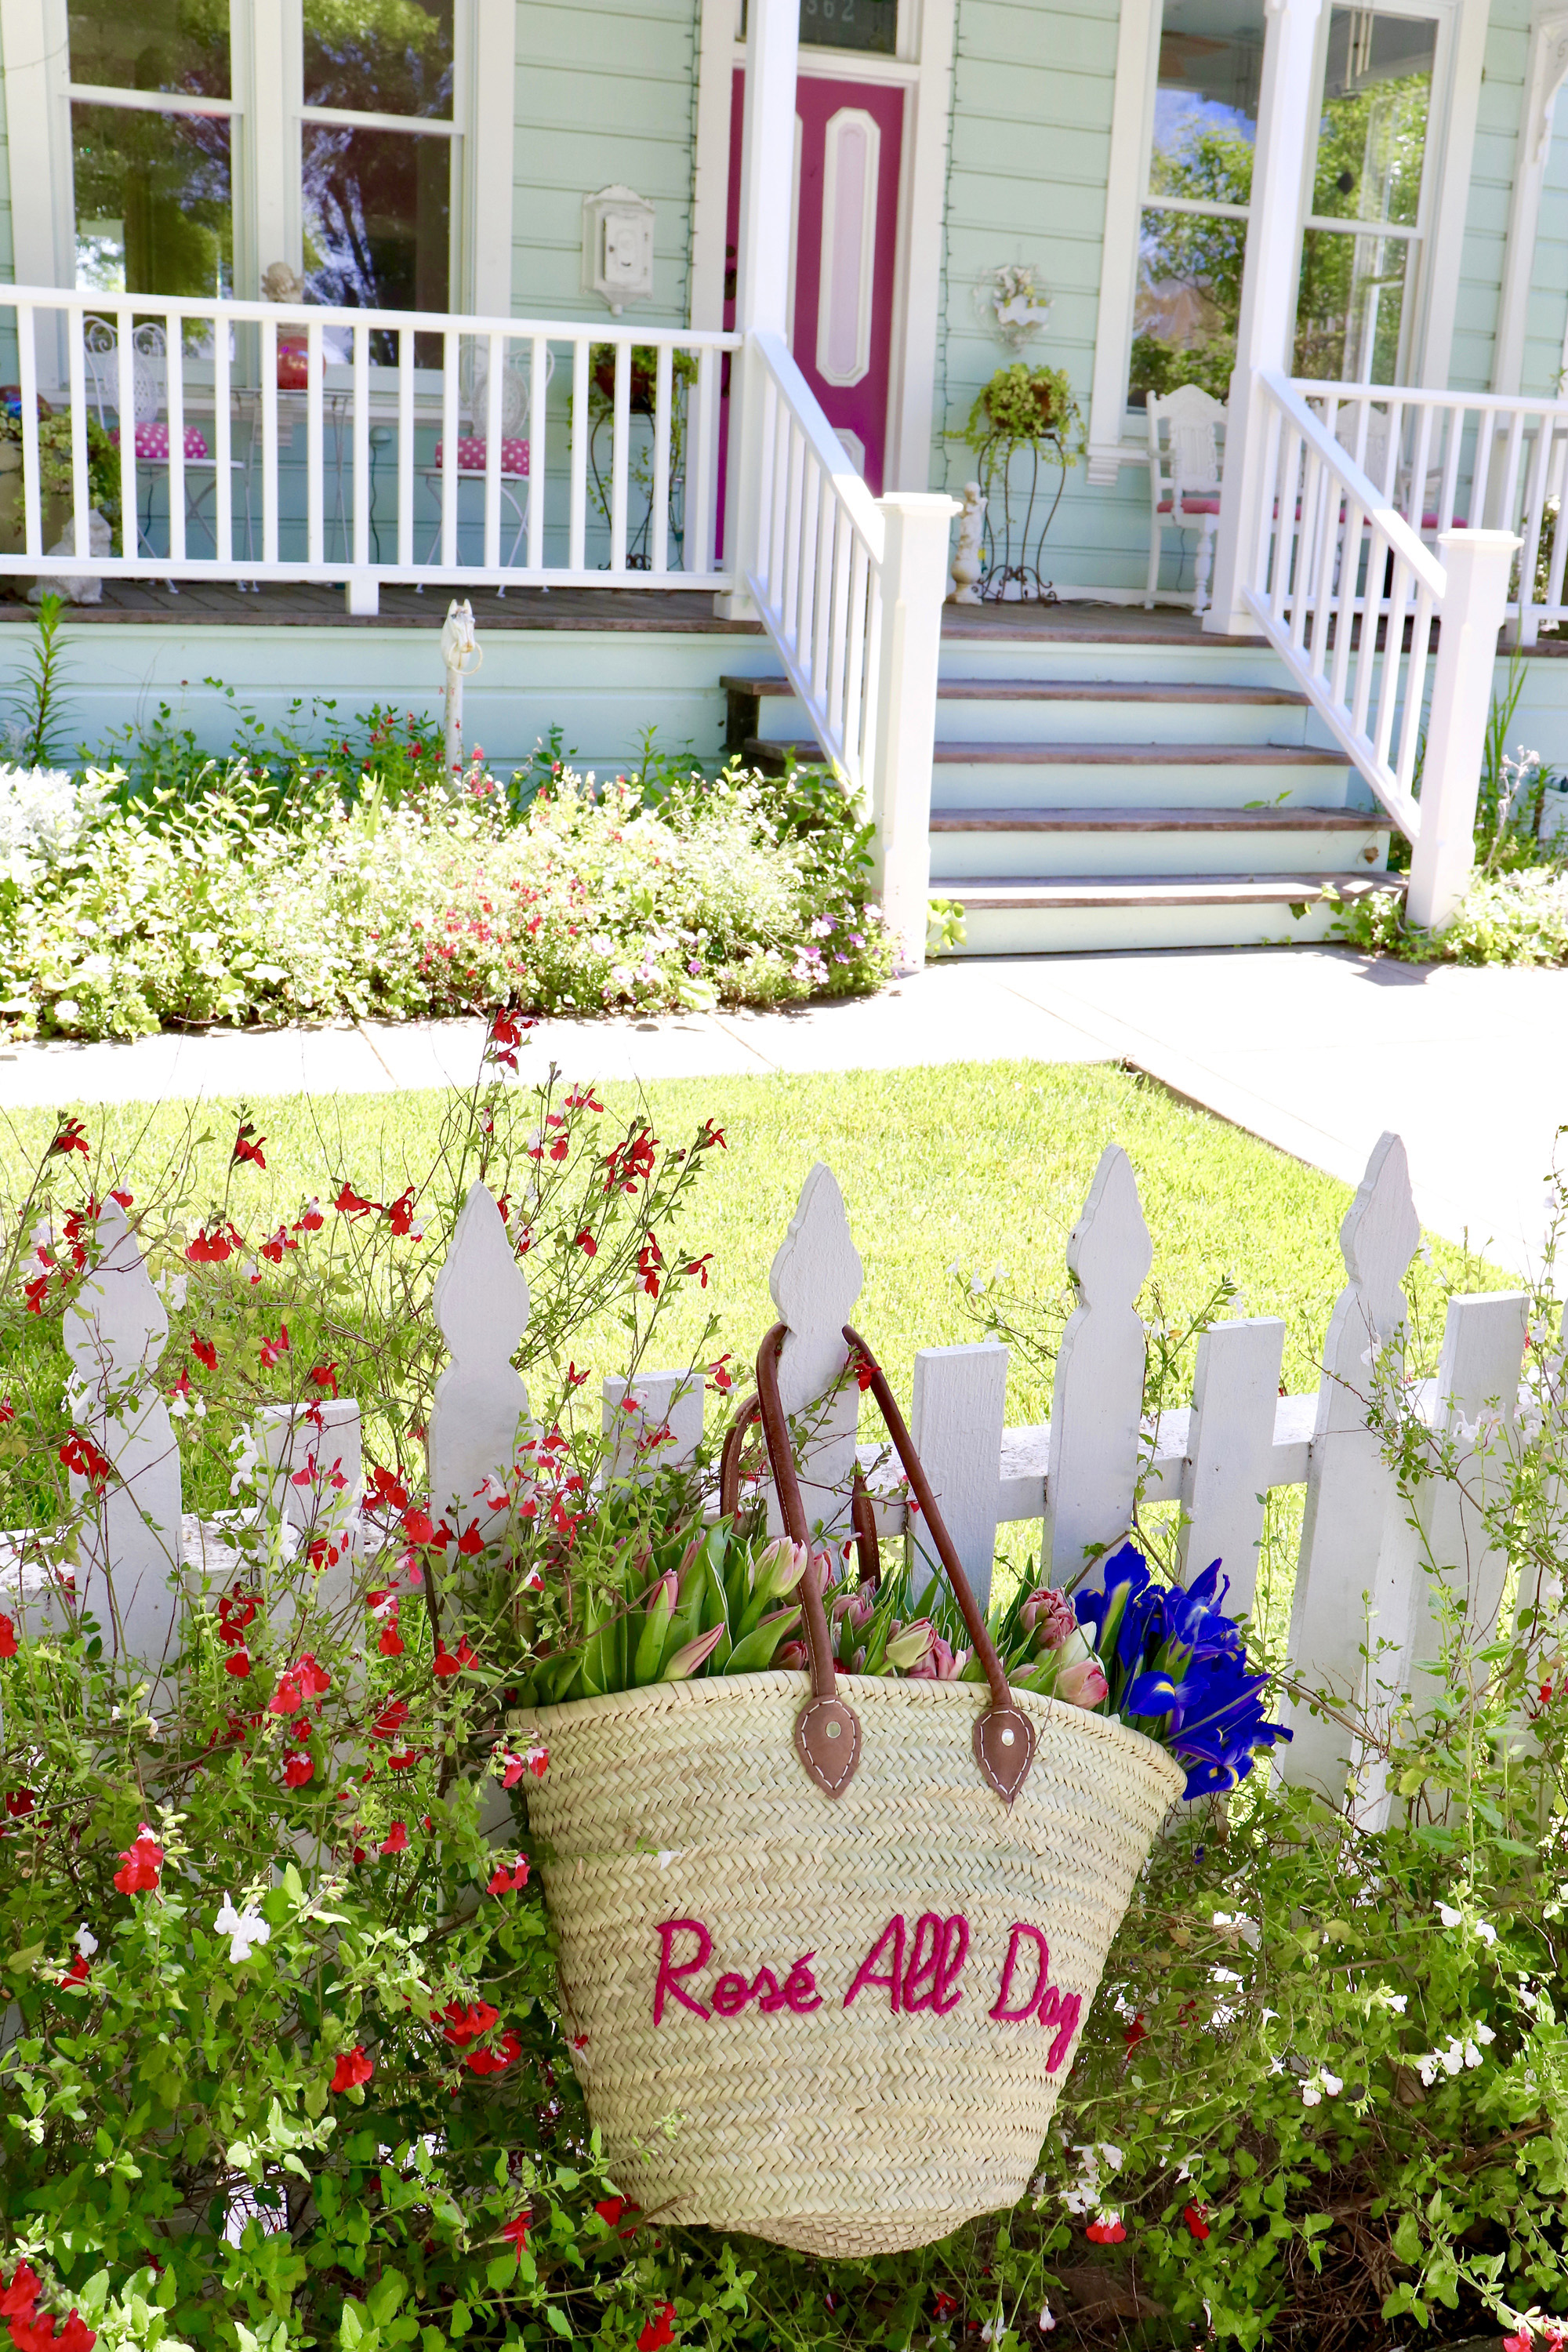 Cottages, Florals, and Sunshine - Oh My!